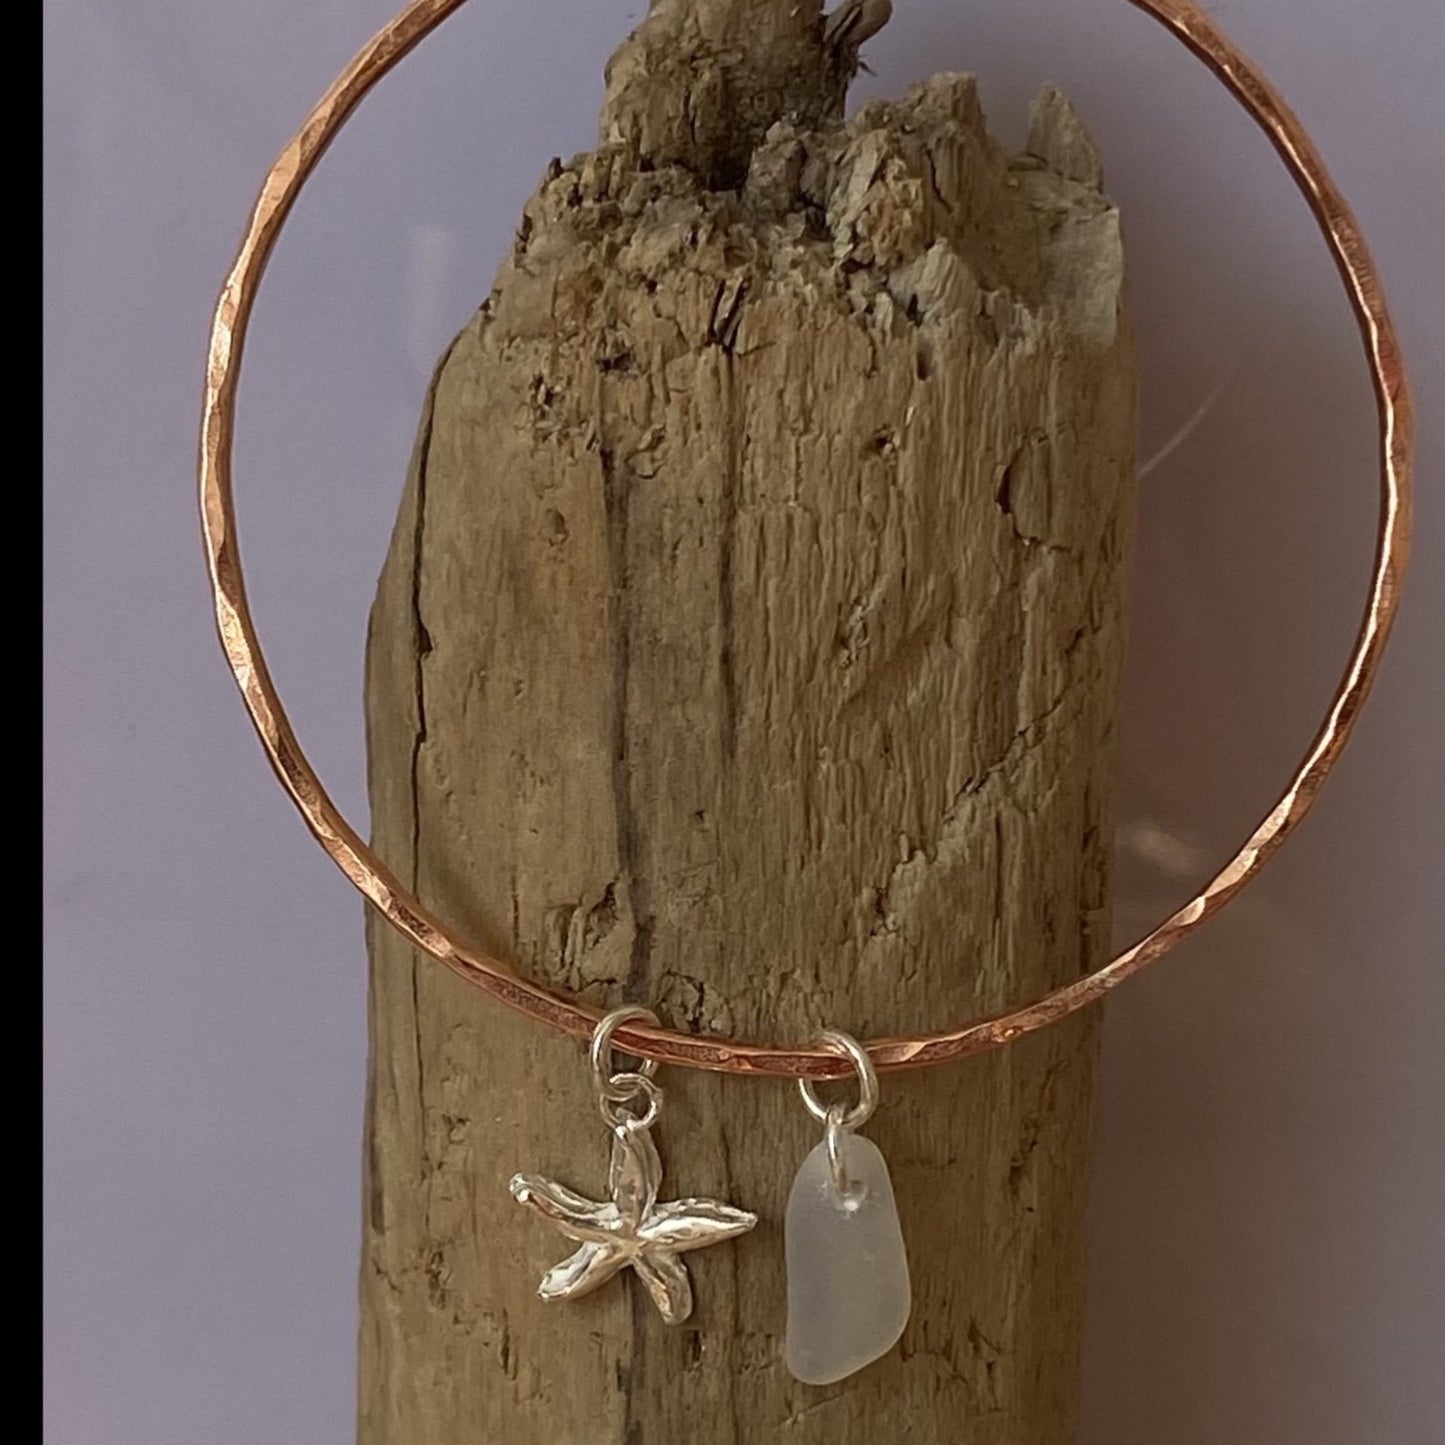 Copper Bangle with Charm - Love Beach Beads